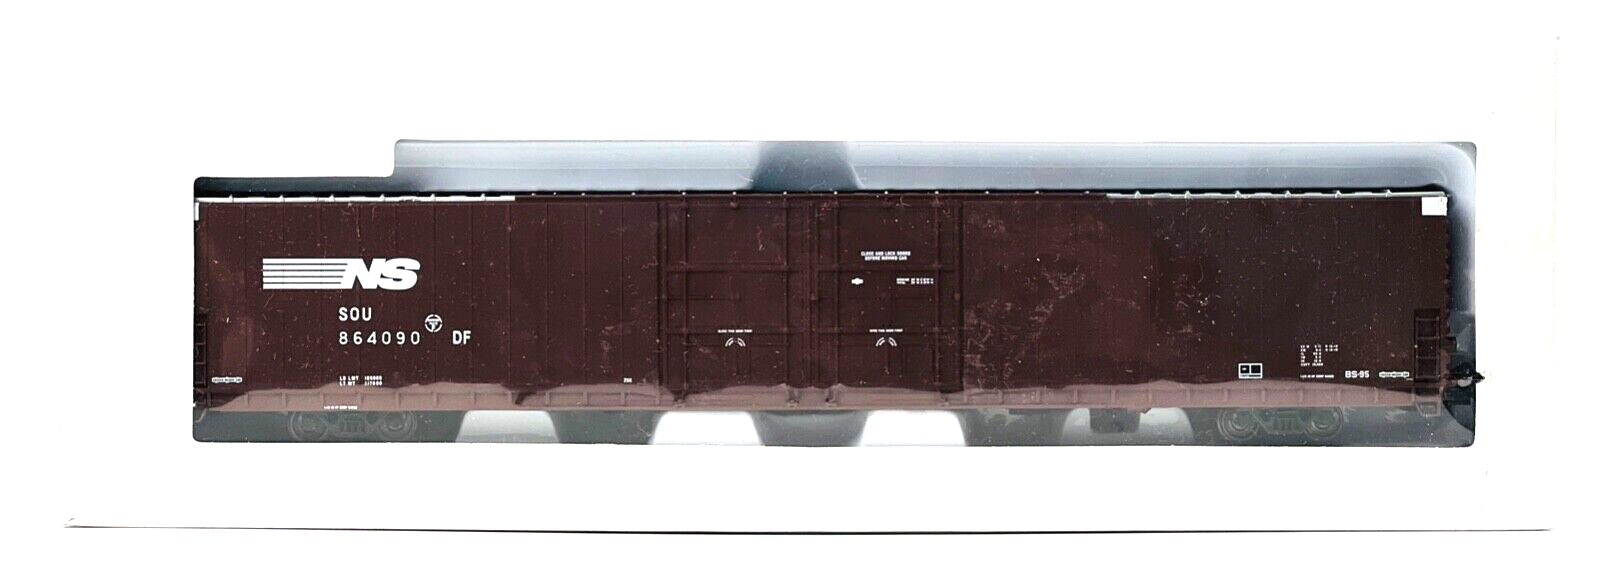 WALTHERS HO SCALE - RAKE OF 3 '86' HIGH CUBE BOX 4-DOOR NORFOLK D.T & I WAGONS'